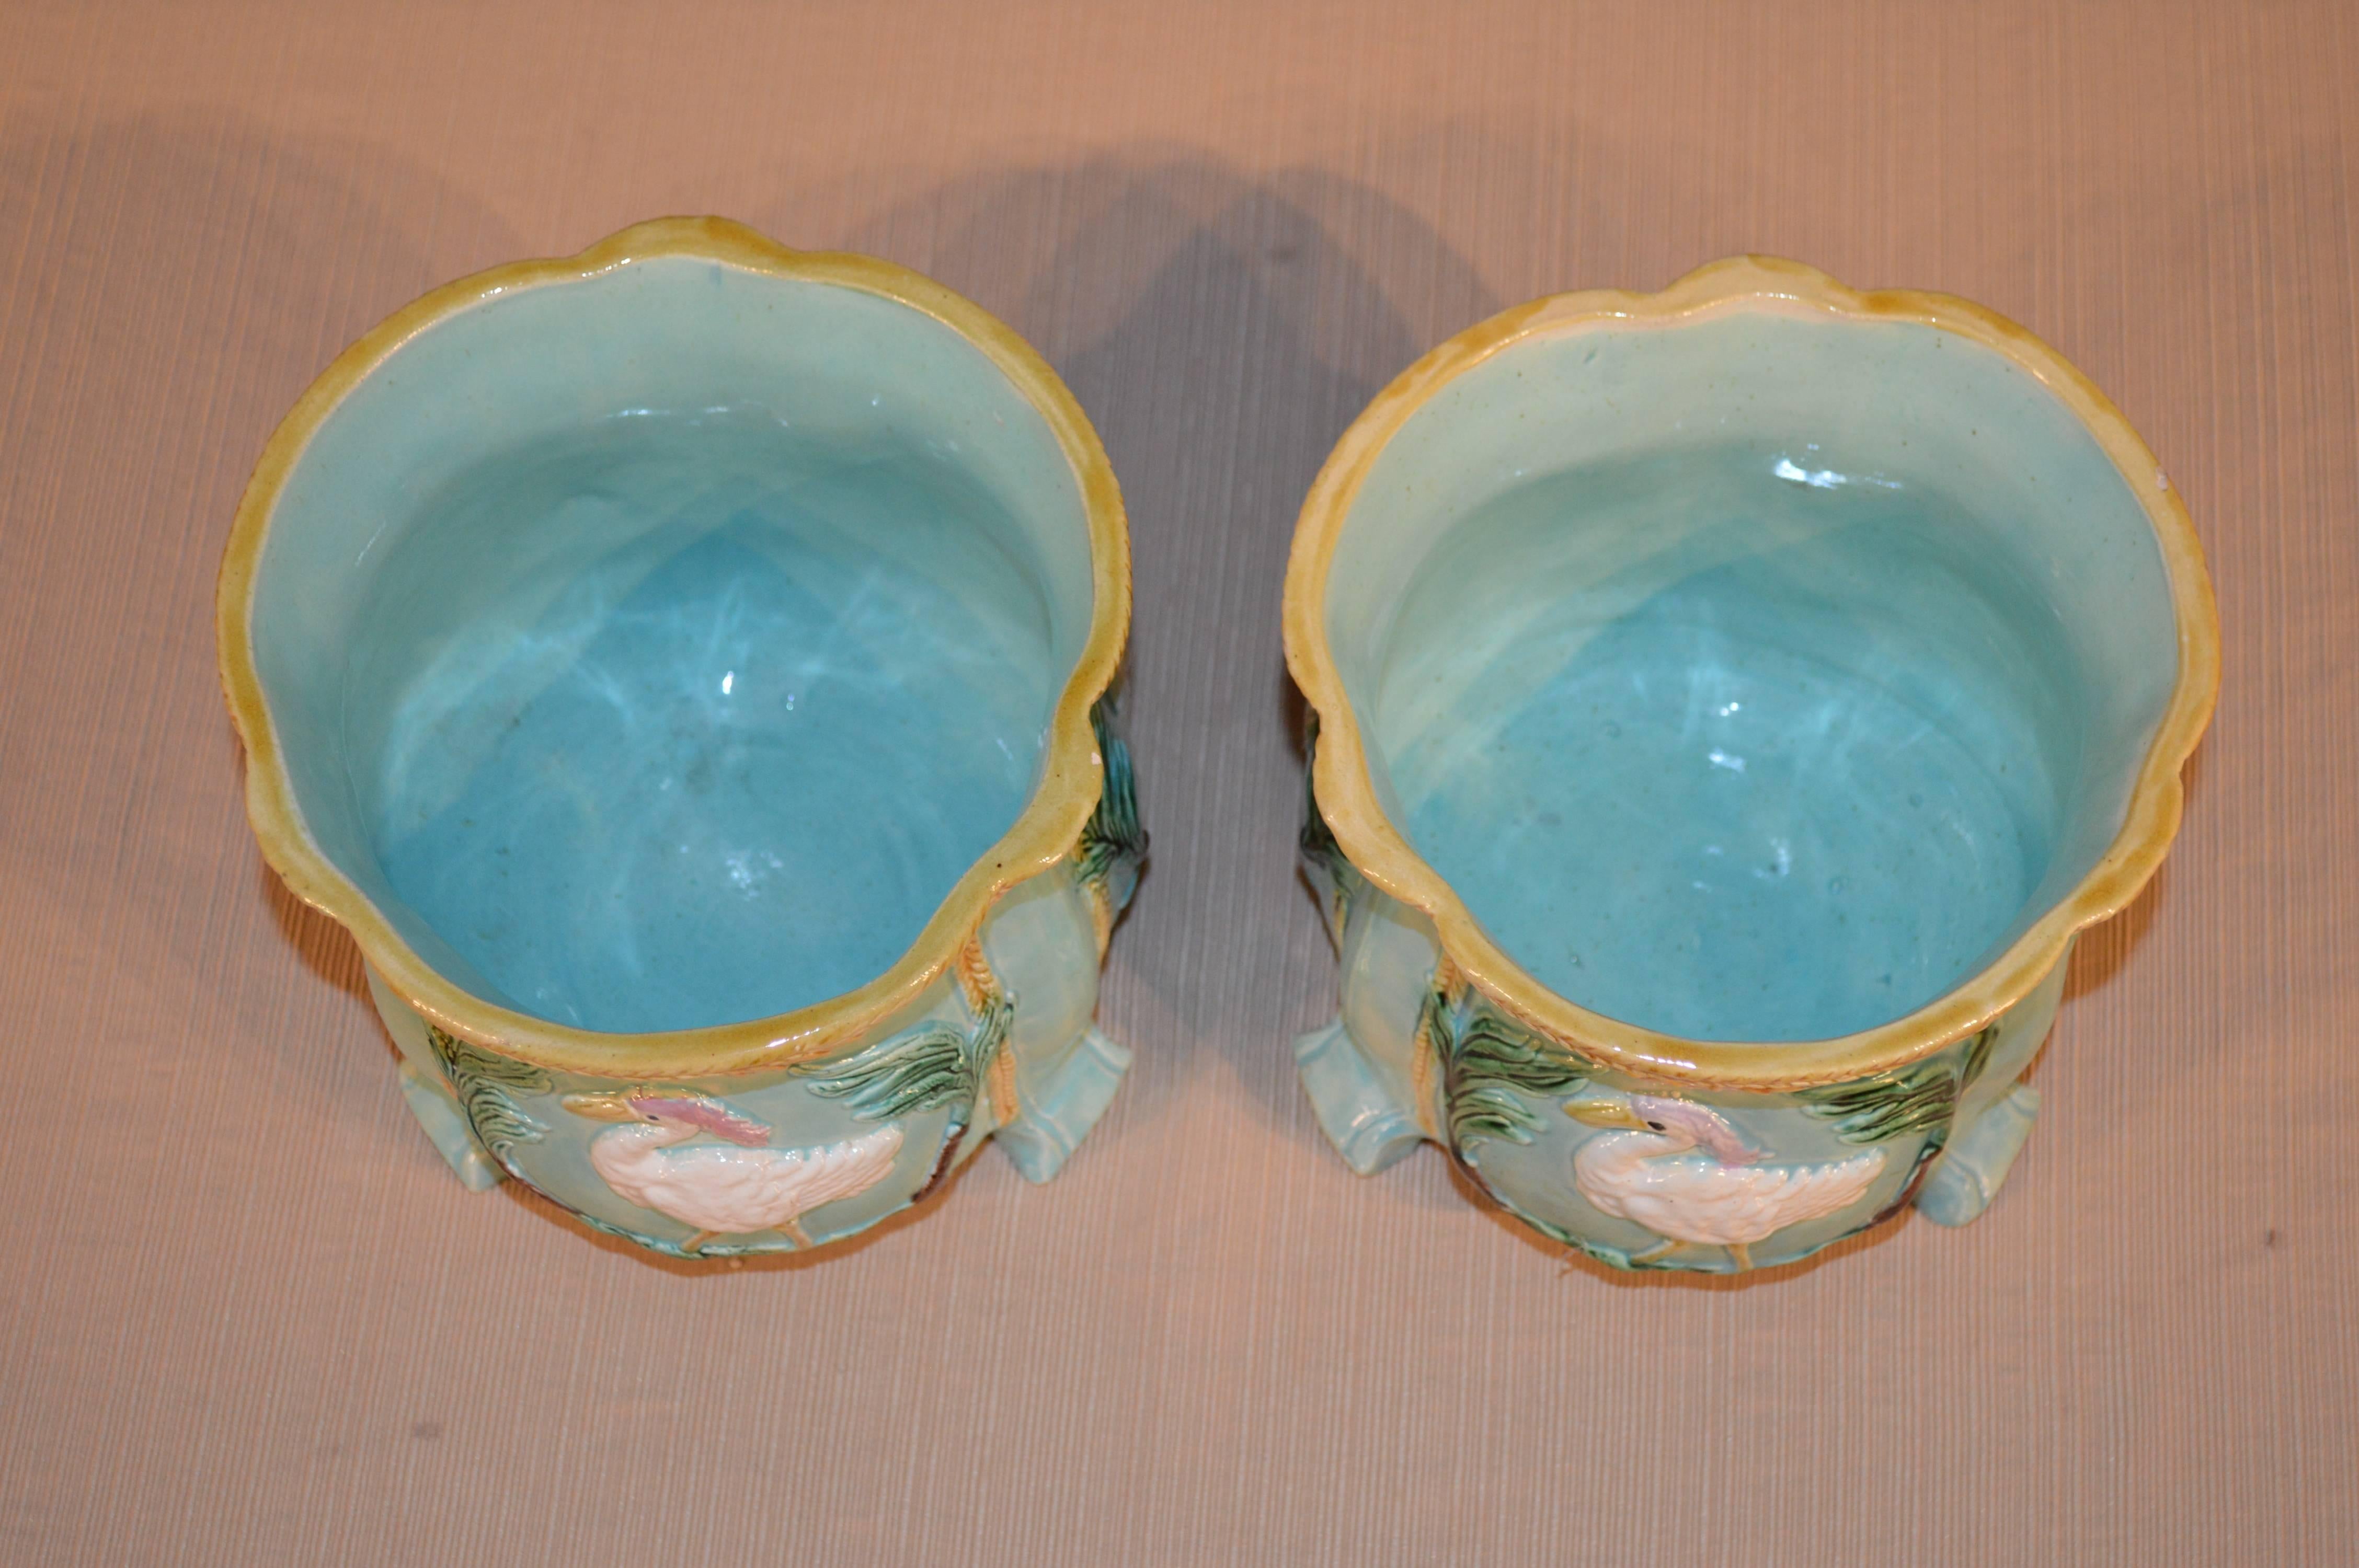 Pair of 19th century French Majolica planters in a gorgeous light turquoise color with birds in wreath garlands.